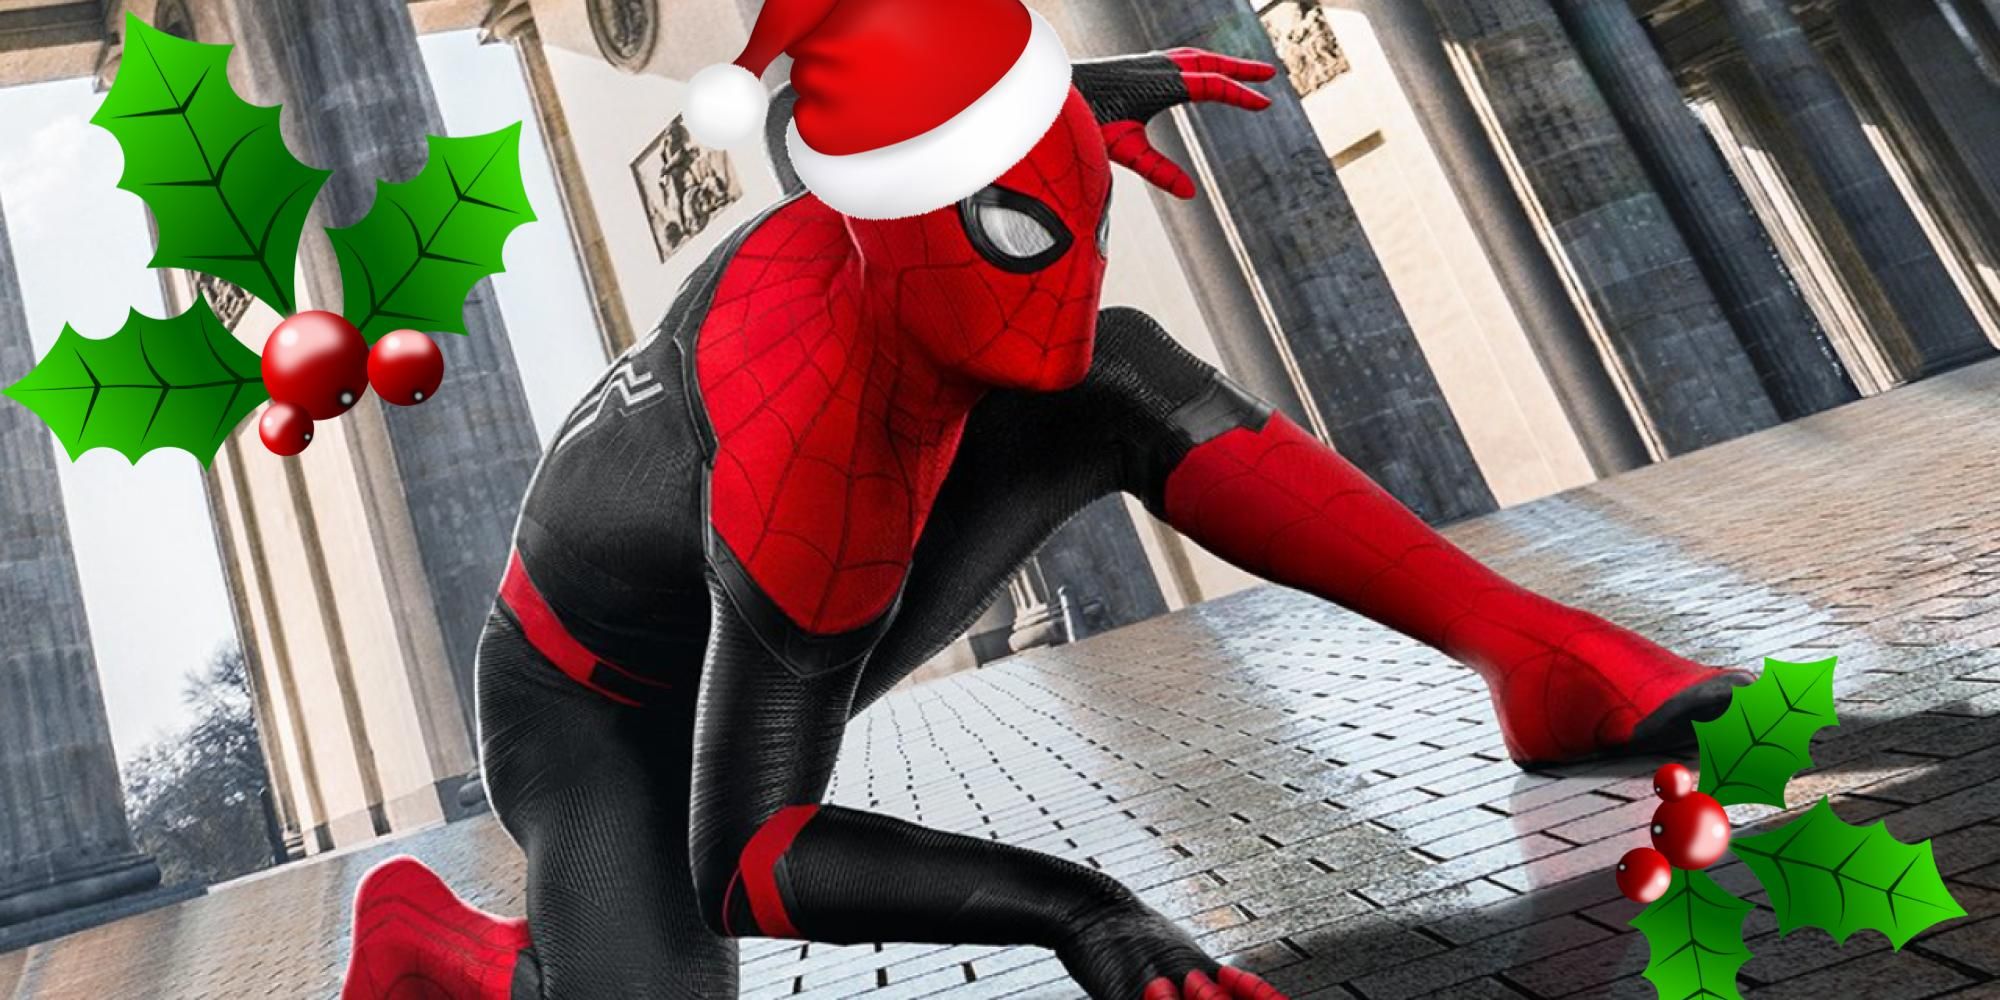 Pitch a MCU Spiderman Christmas Movie that's set during the